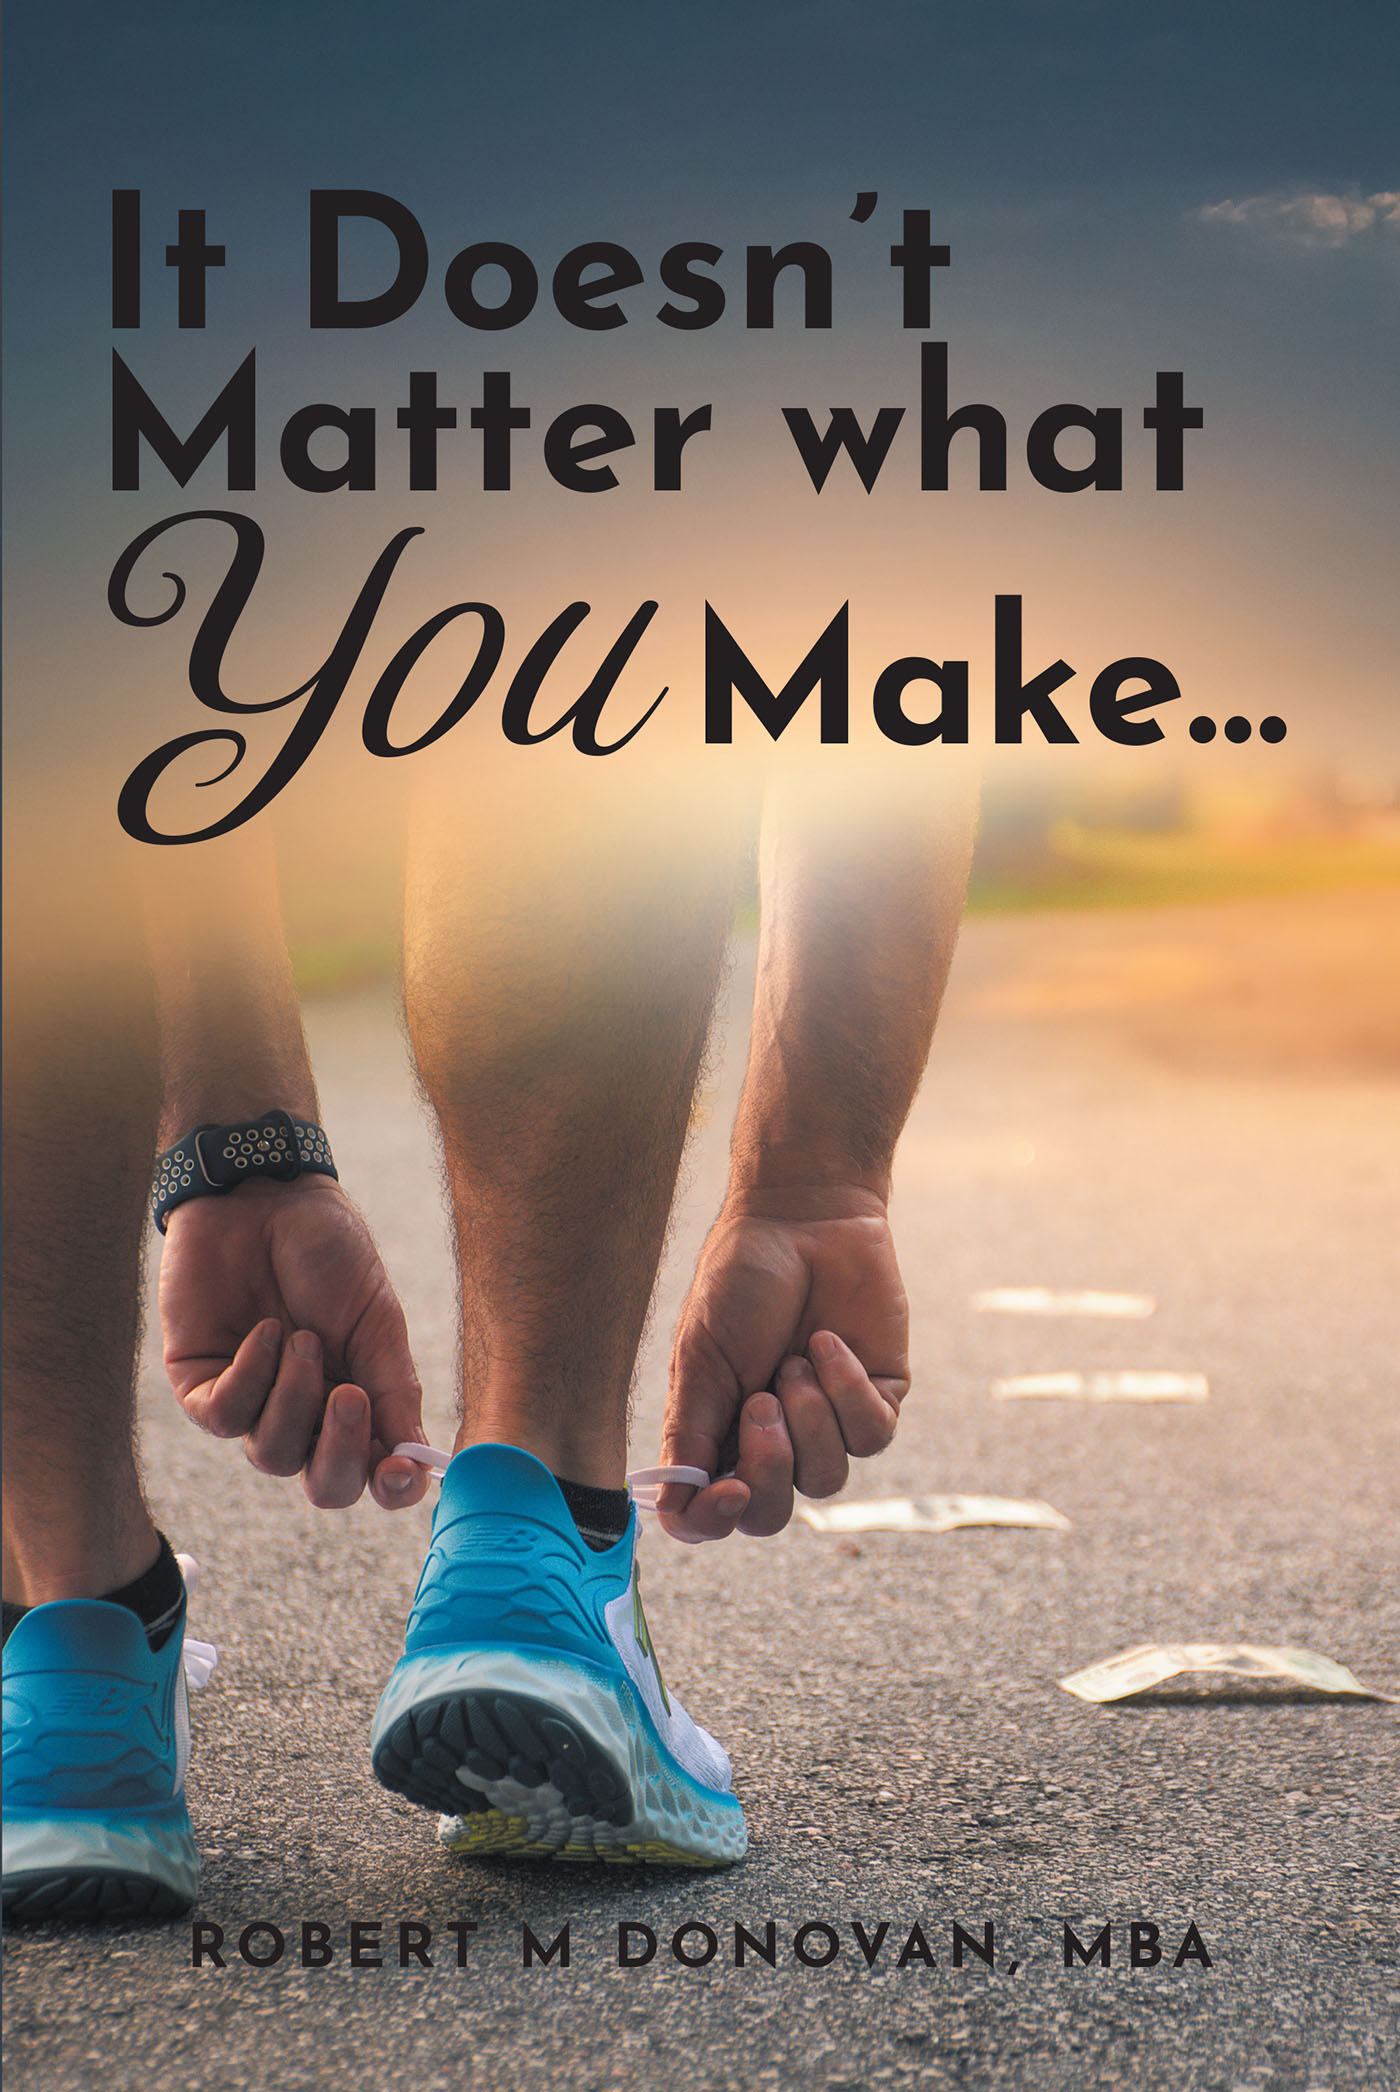 Robert M Donovan, MBA’s Newly Released “It Doesn’t Matter what You Make...” is a Fresh Perspective for Learning How to Establish Financial Well-Being